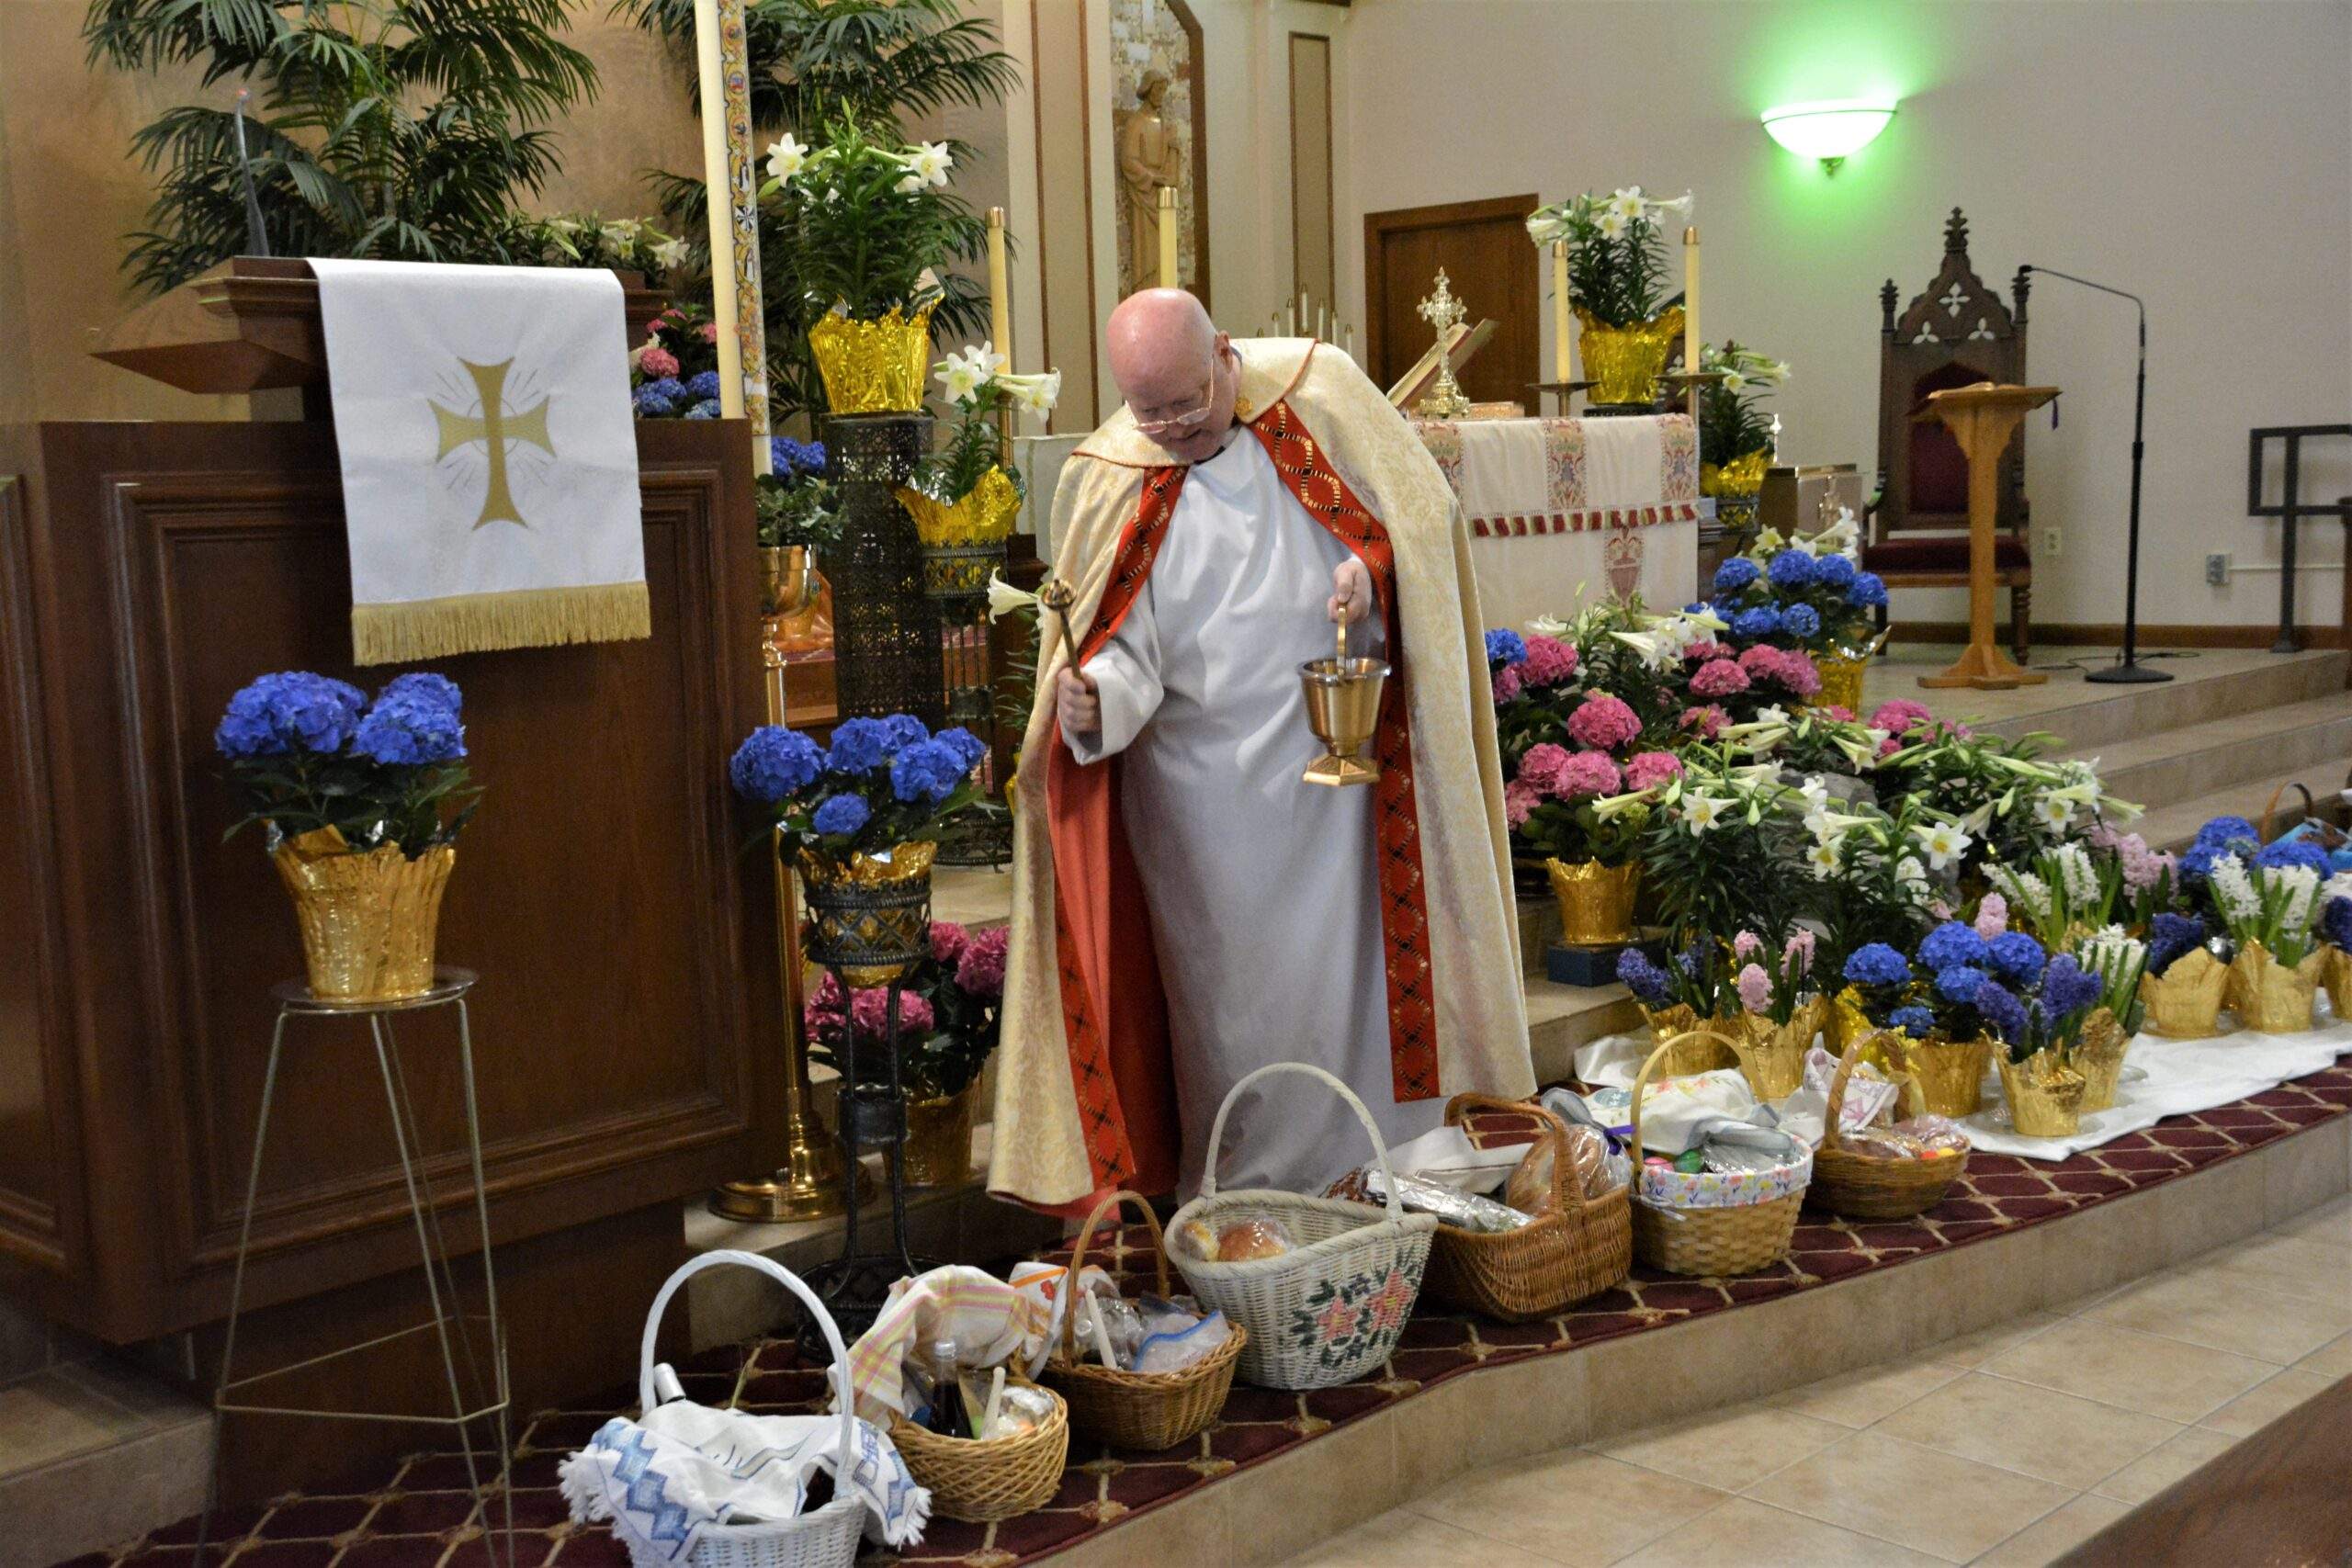 Fr. Kelly blesses more than 20 Easter Baskets around the altar at St. Rose.